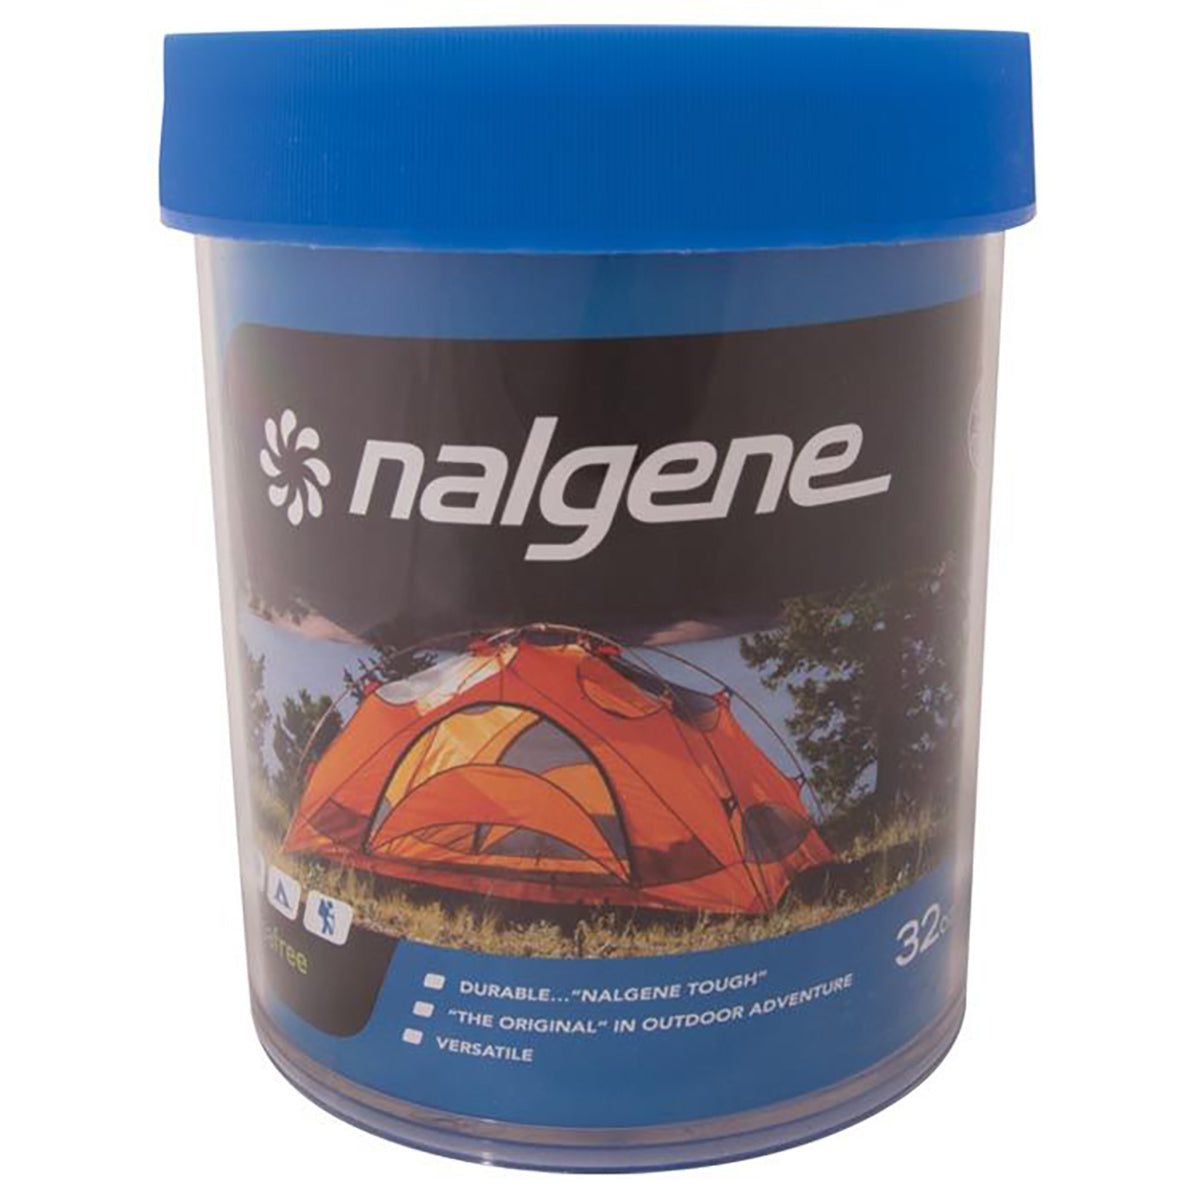 Nalgene Wide Mouth Outdoor Storage Container - Clear/Blue Nalgene